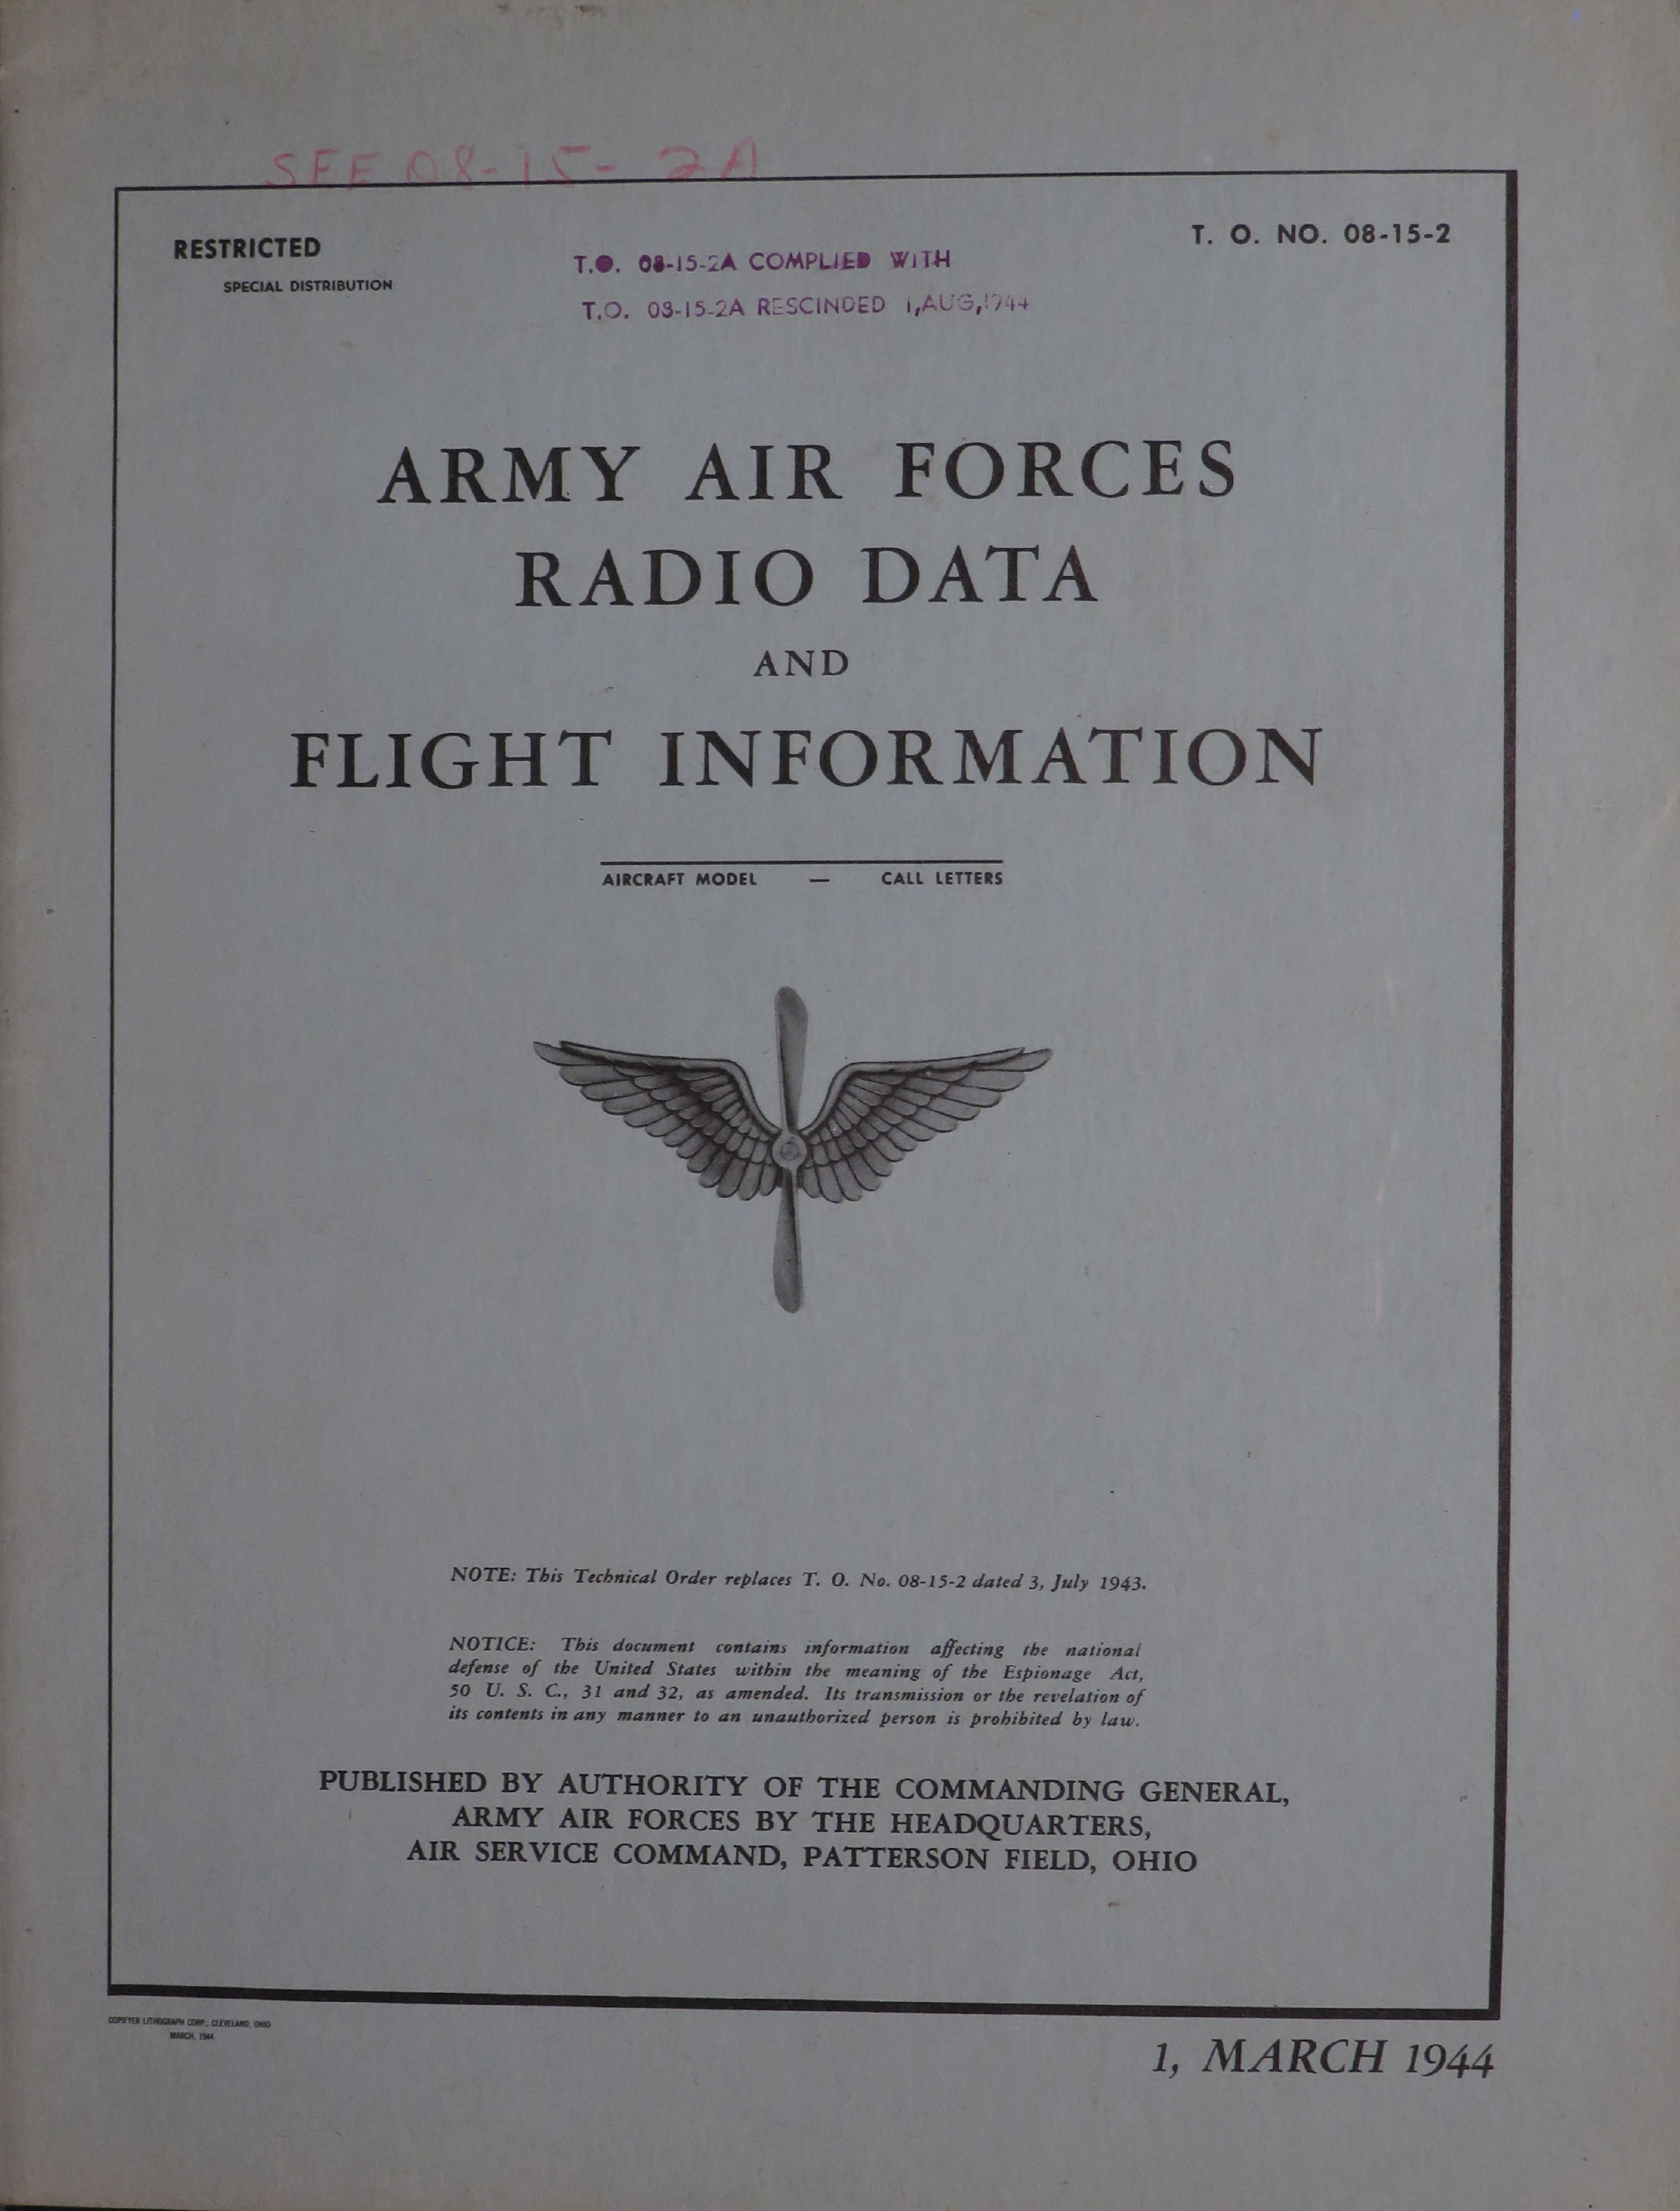 Sample page 1 from AirCorps Library document: Radio Data & Flight Information